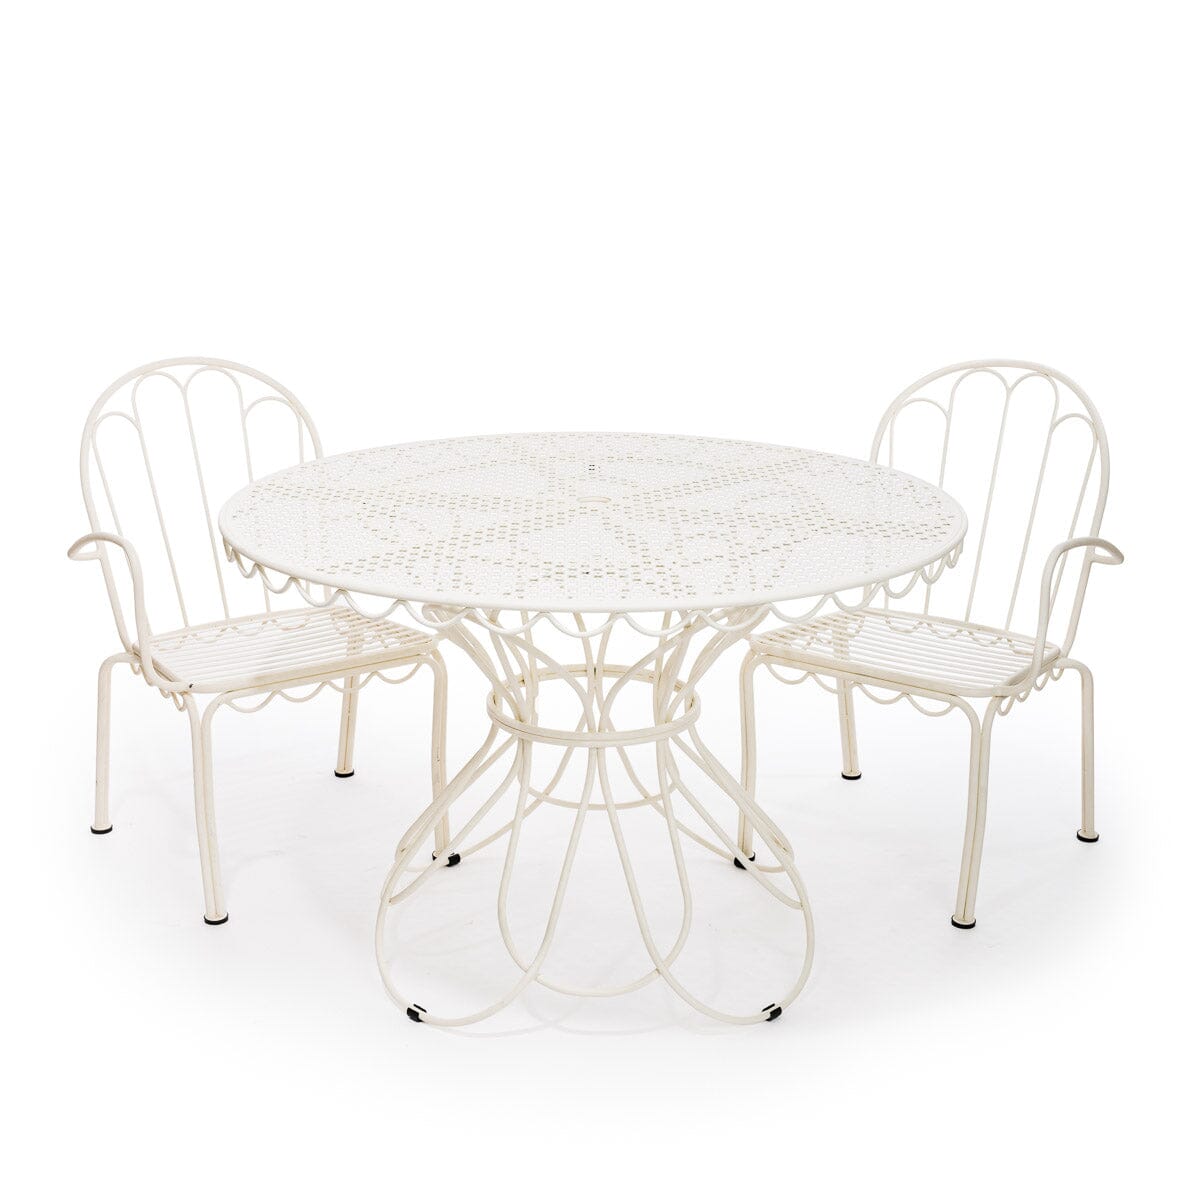 The Table For Two Set - Antique White